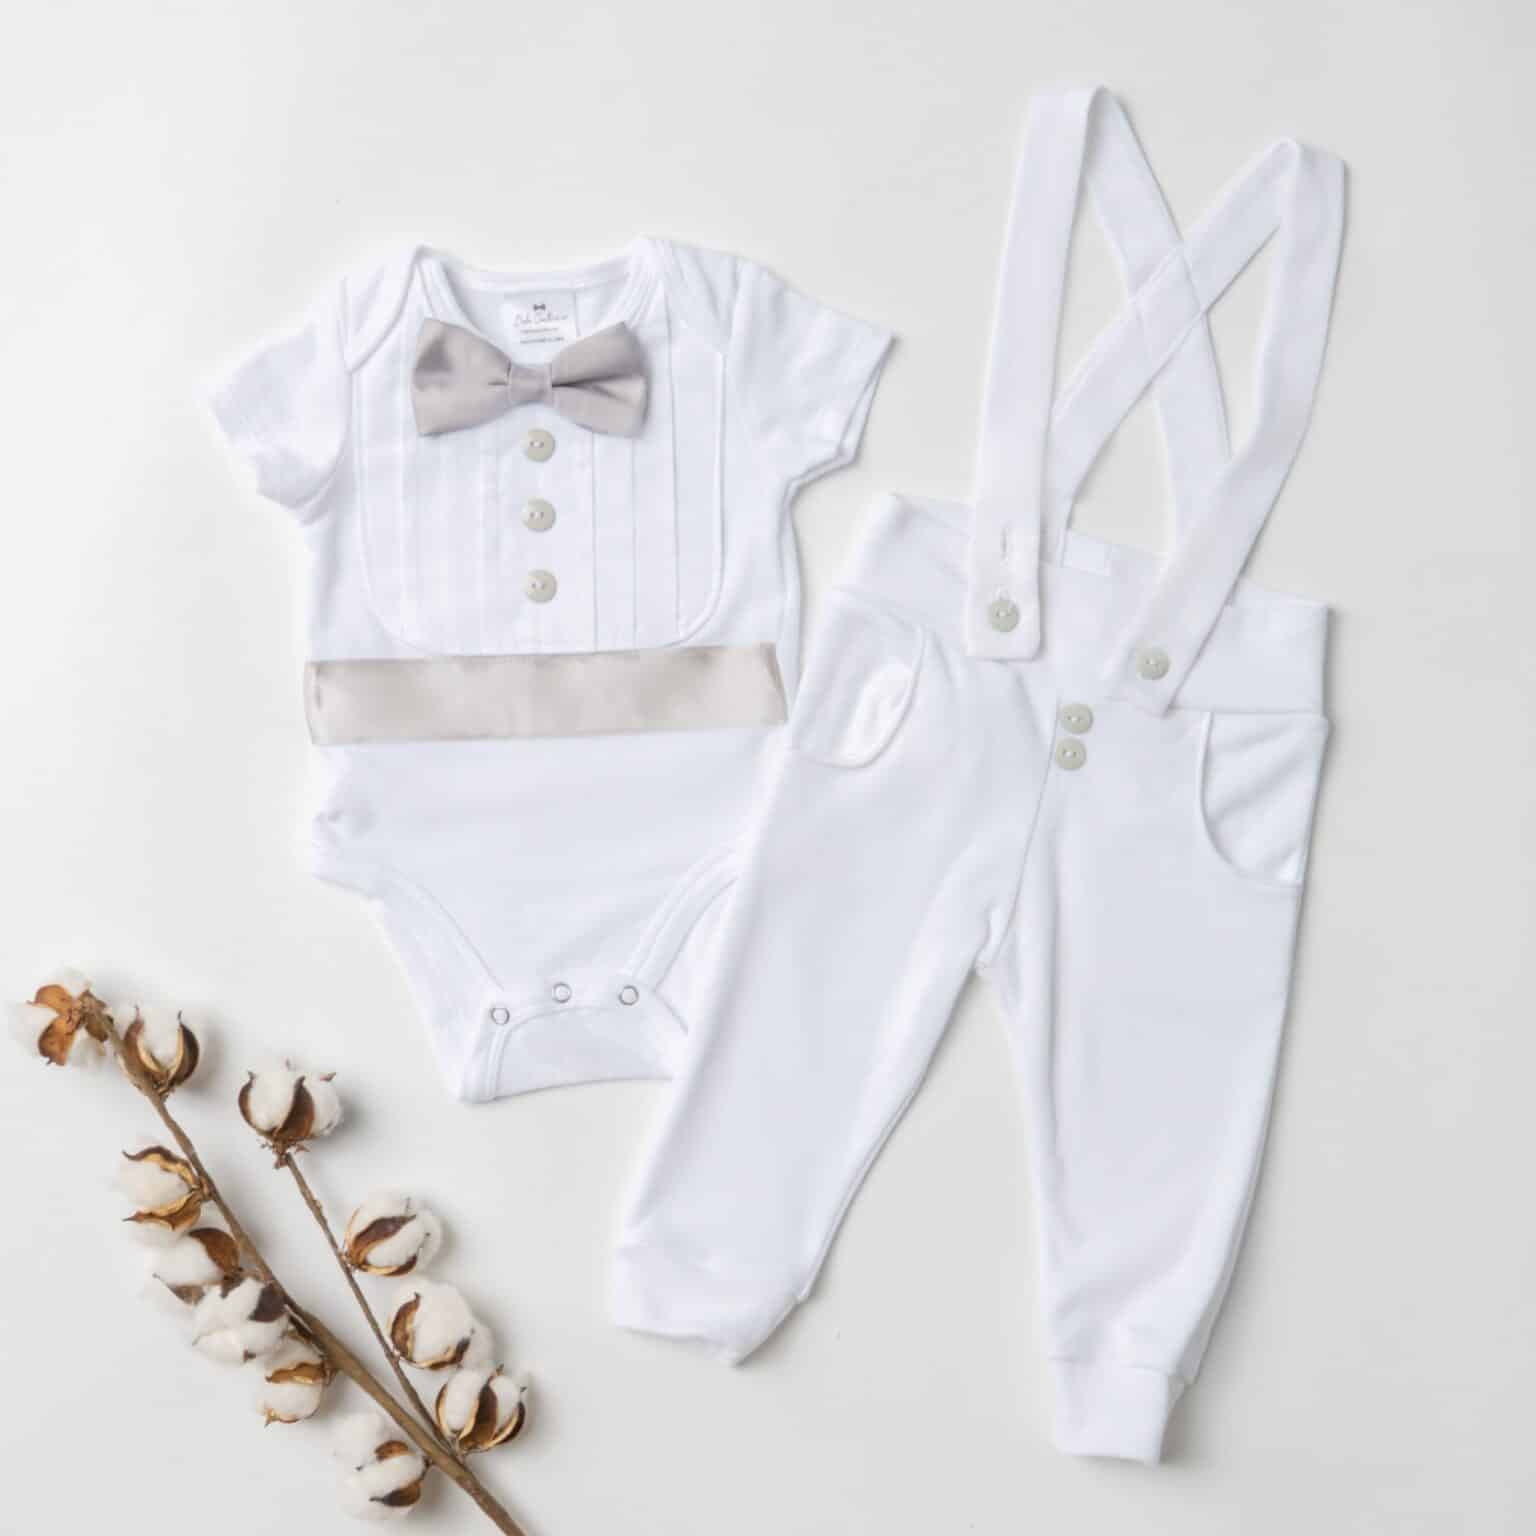 White and Grey Boy Baptism Outfit with Bow Tie & Accents